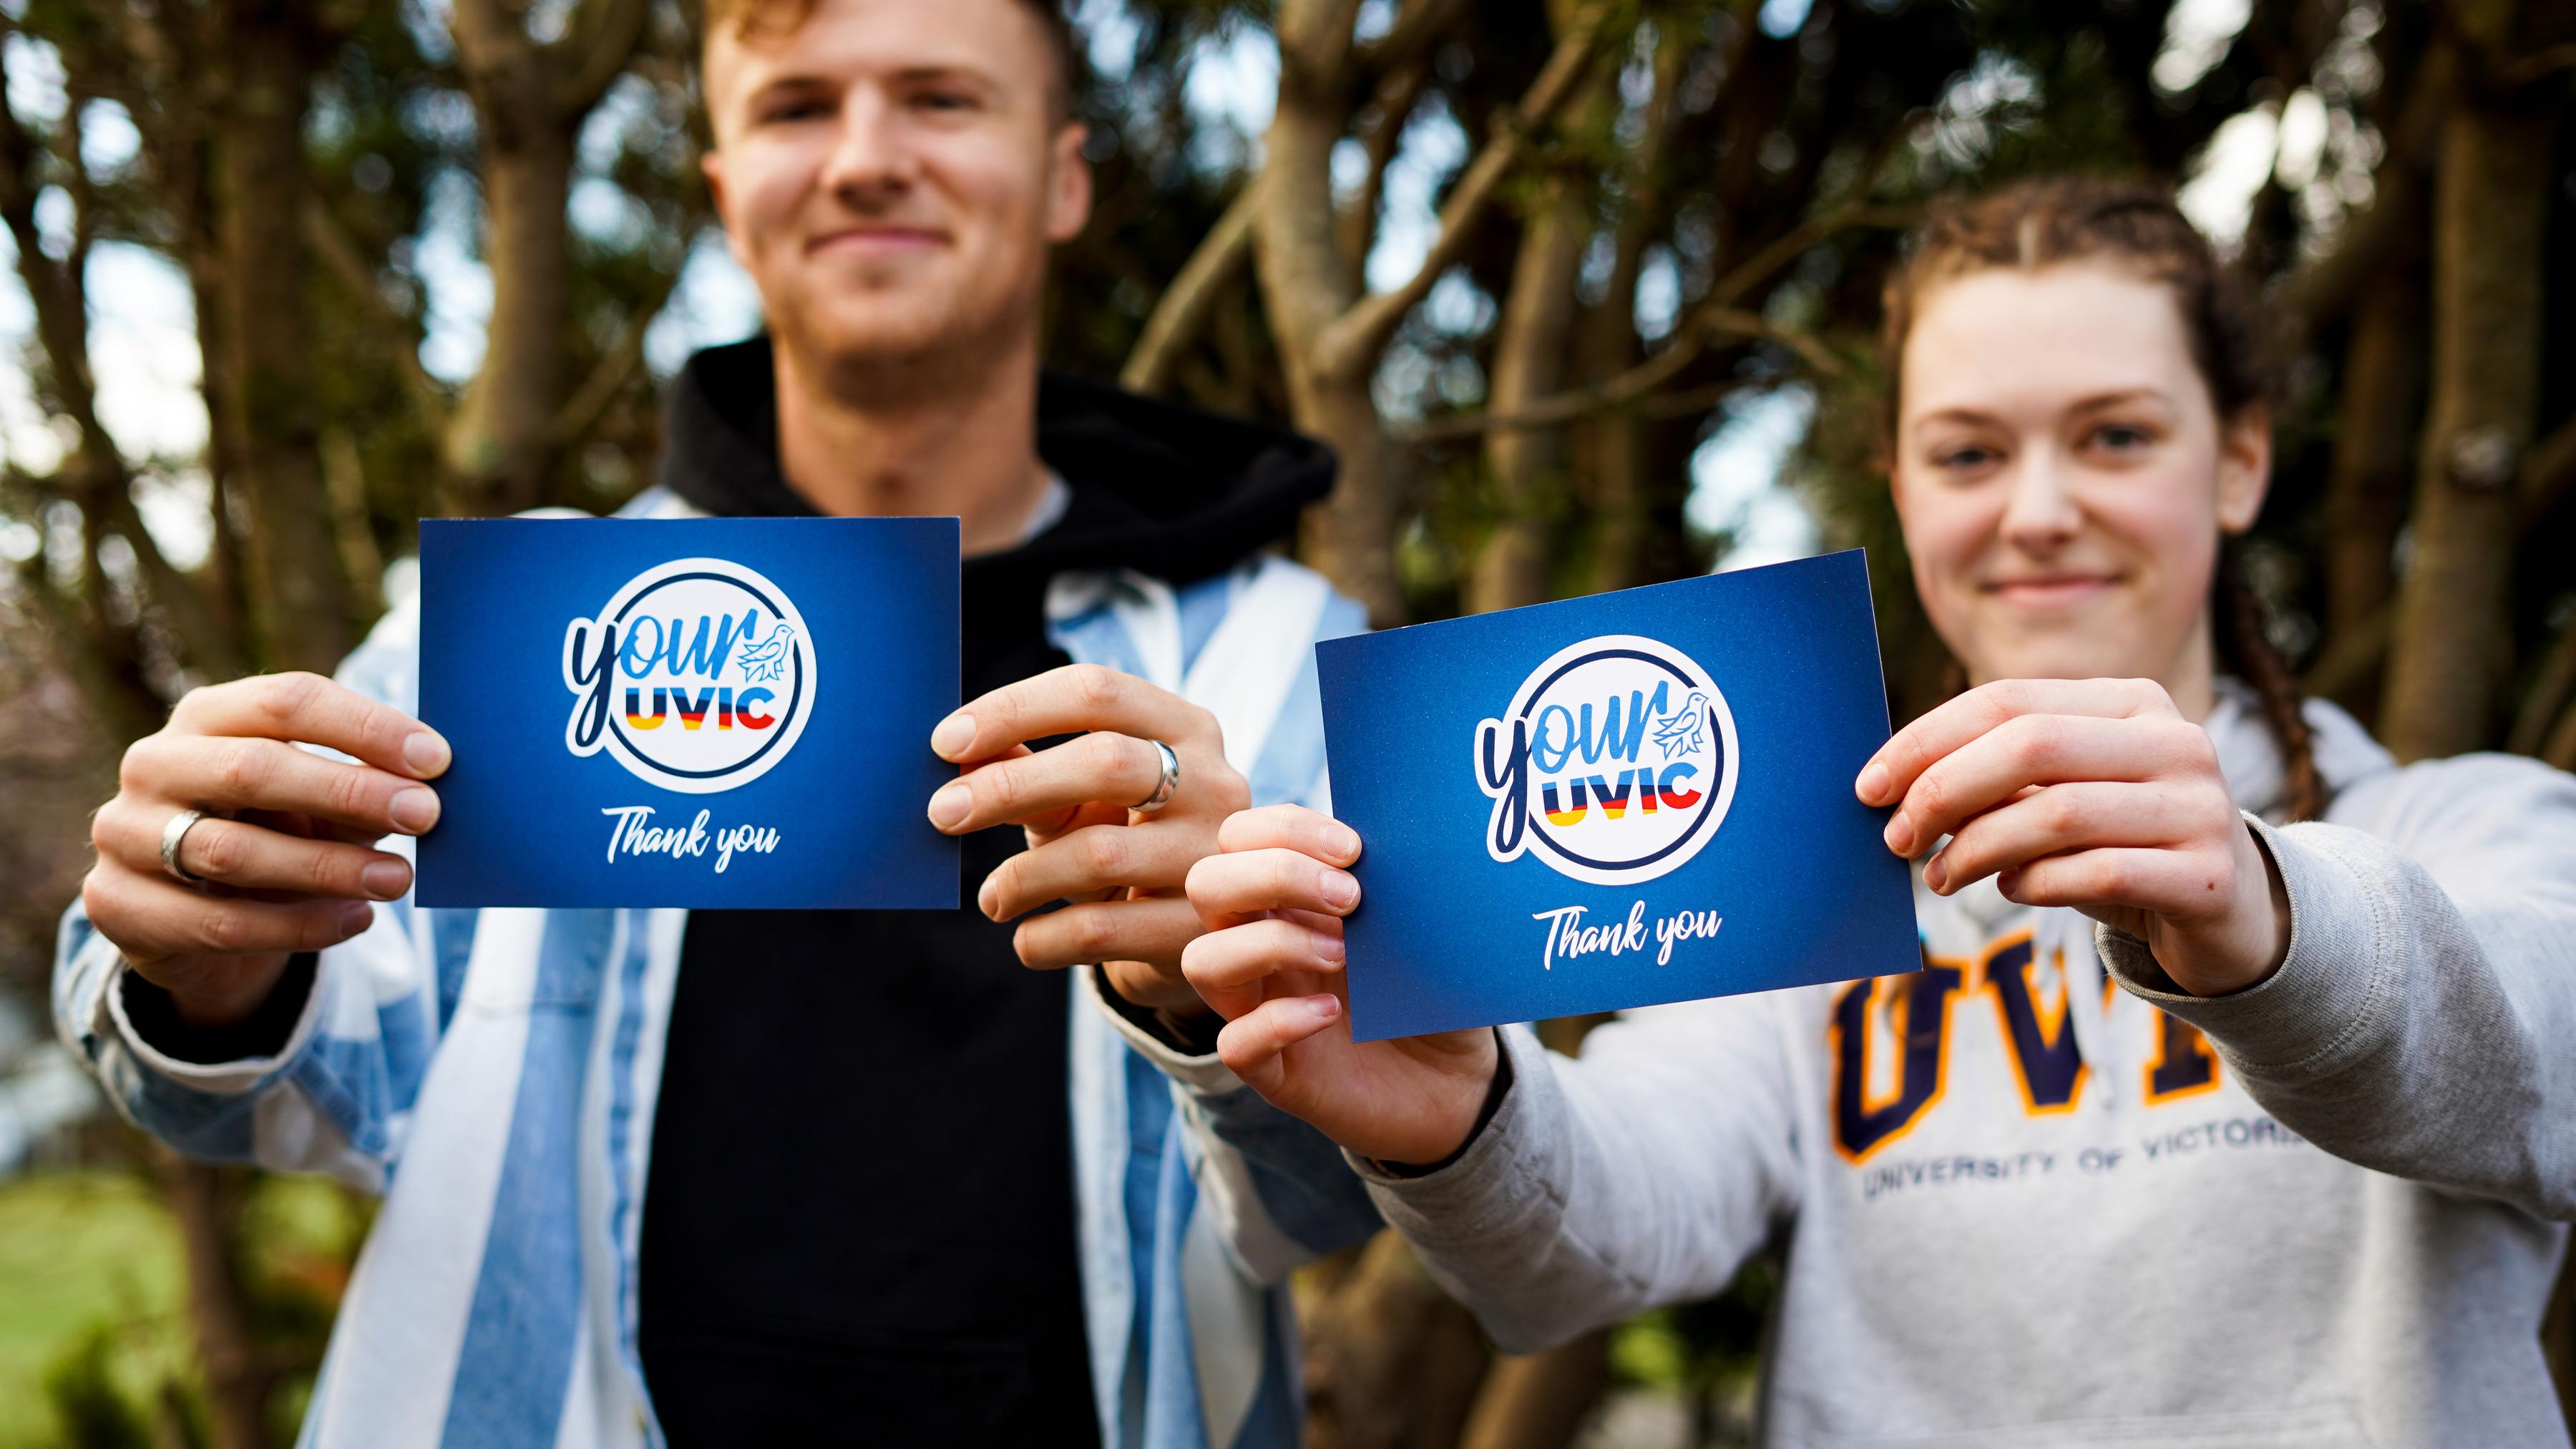 Two students smile holding your uvic thank you cards in front of them